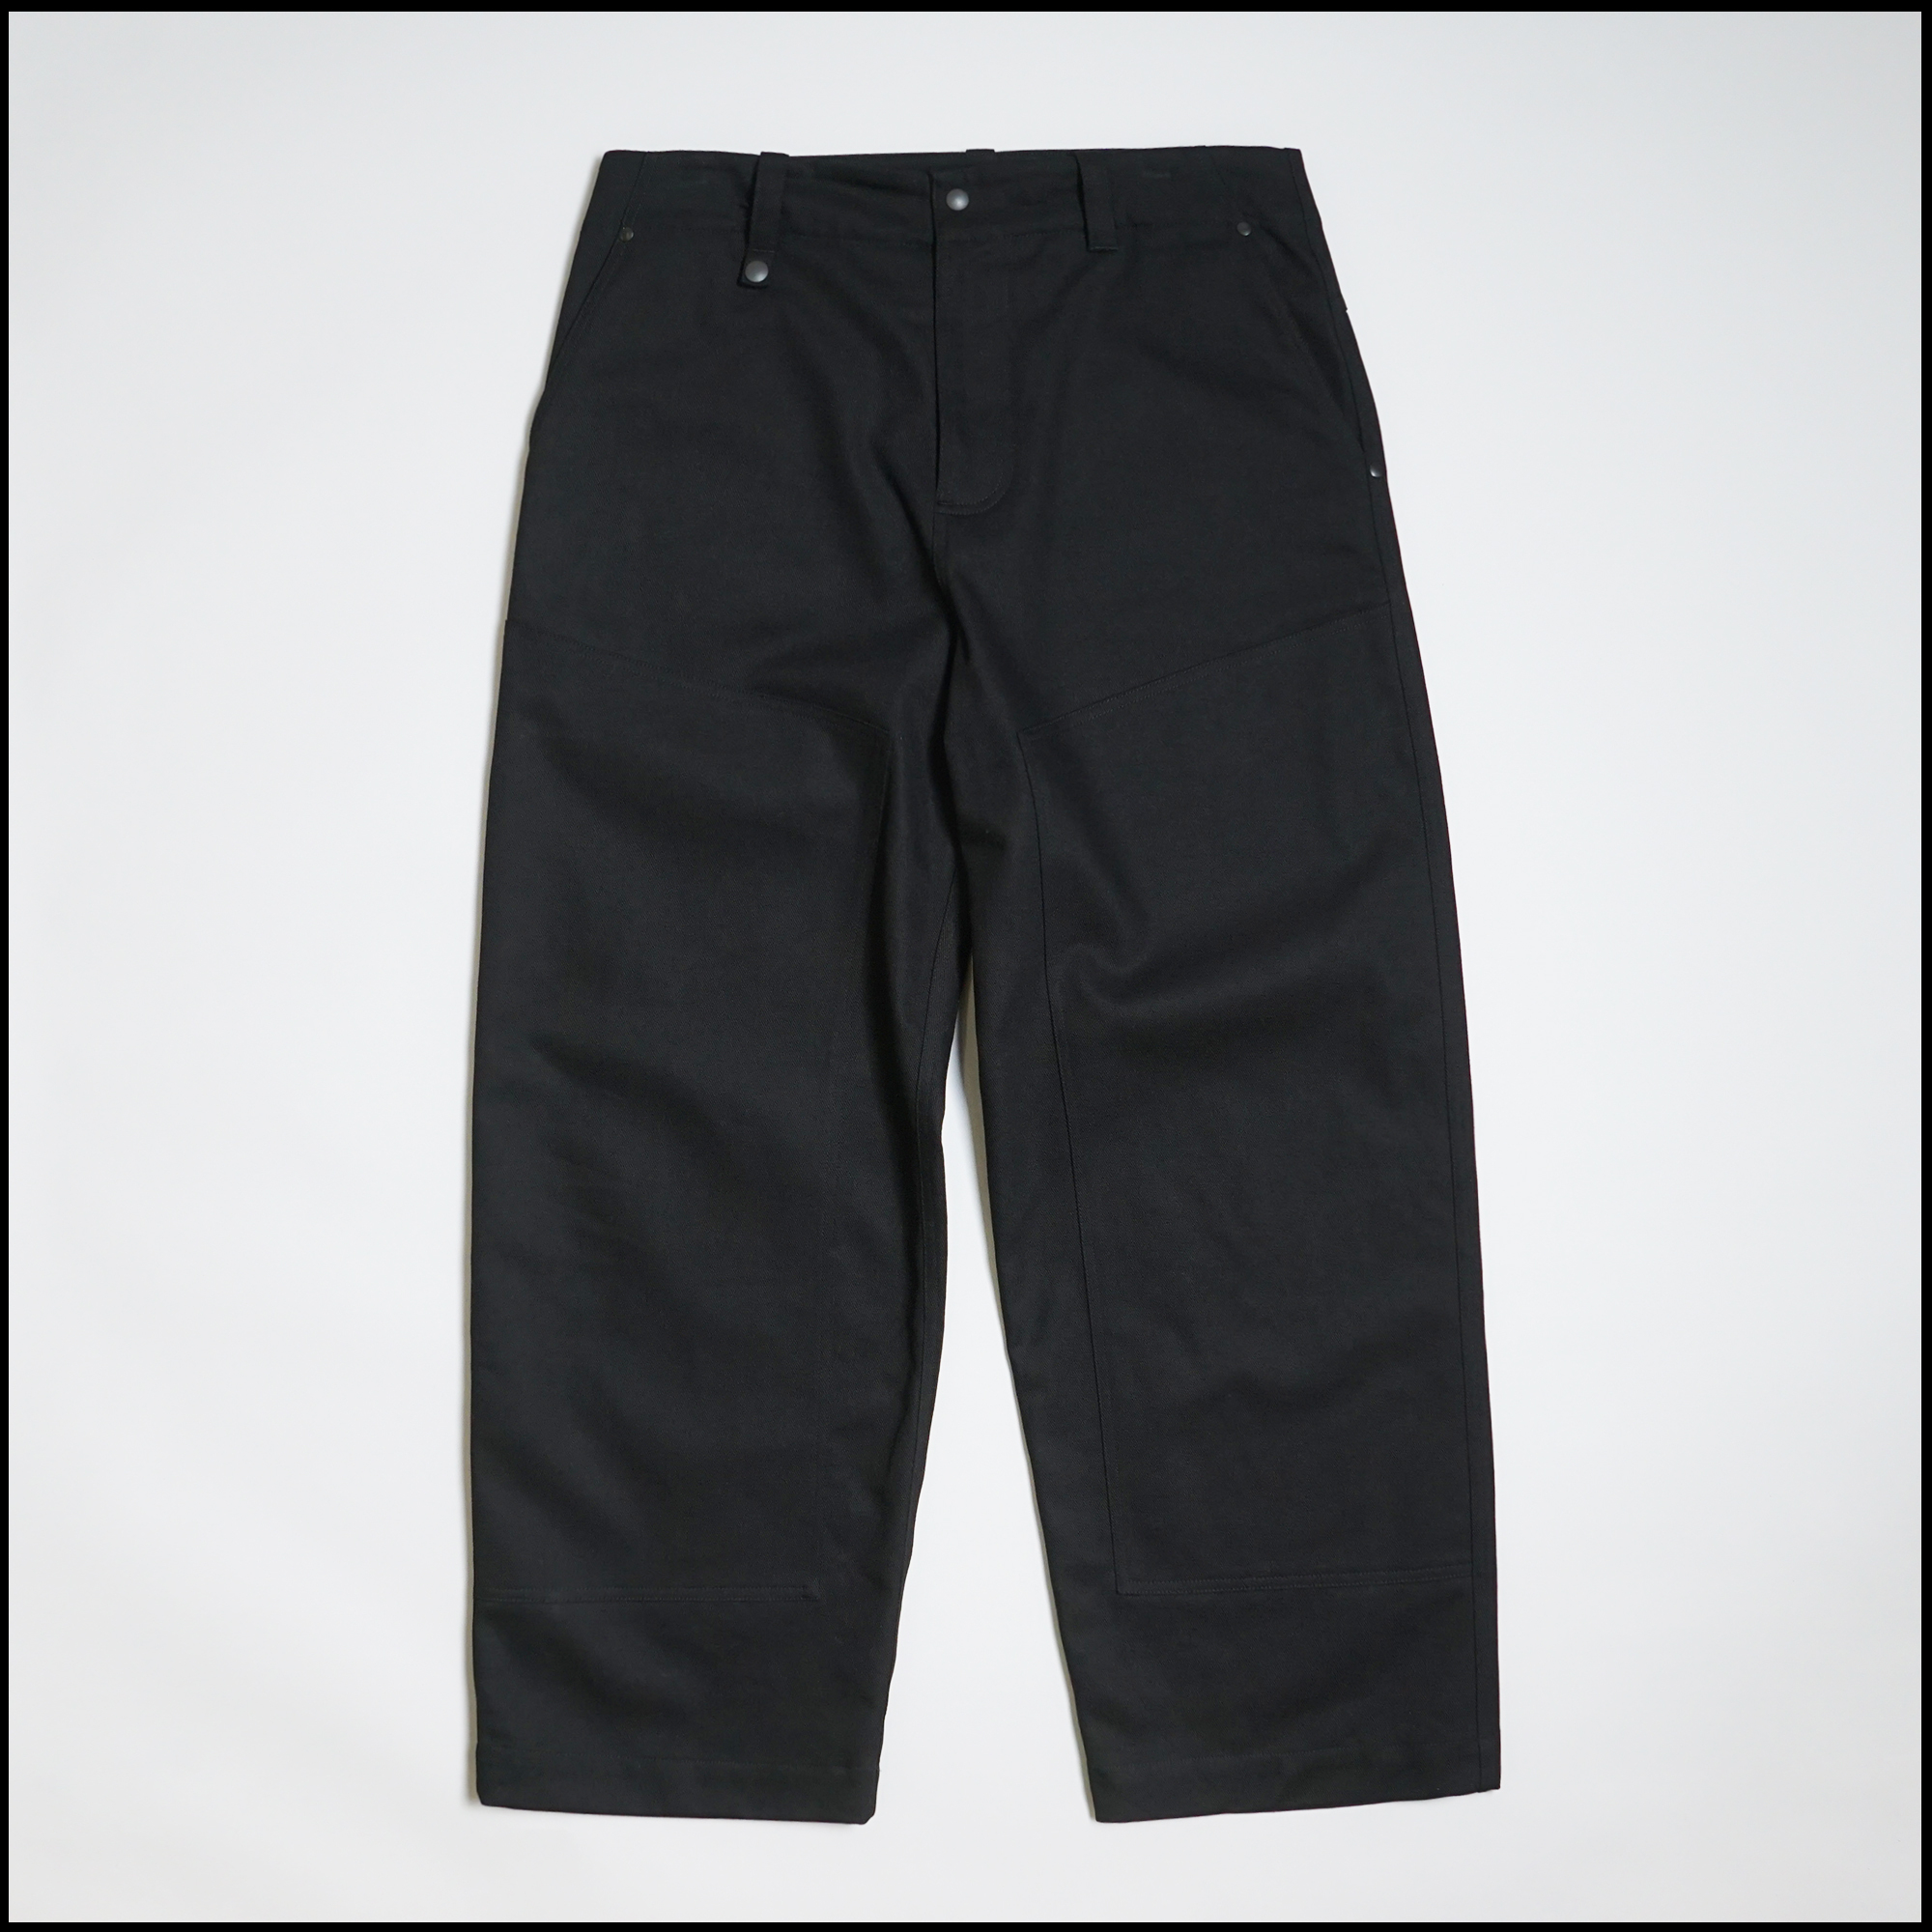 Day Pants in Black color by Arpenteur by C'H'C'M'